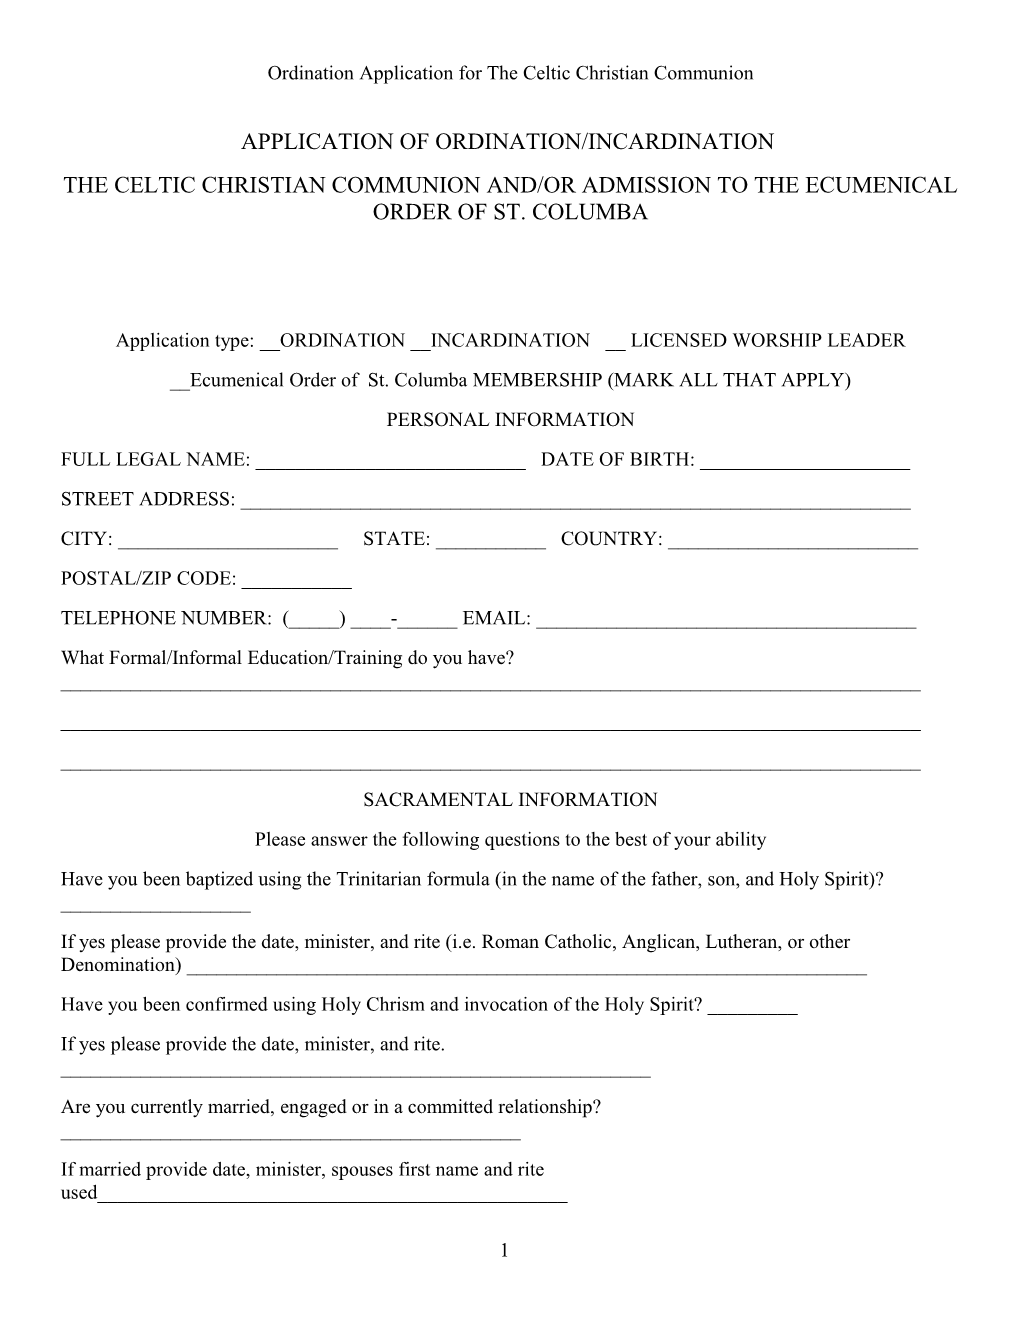 Application of Ordination/Incardination and Admission to the Ecumical Order of Saint Columba